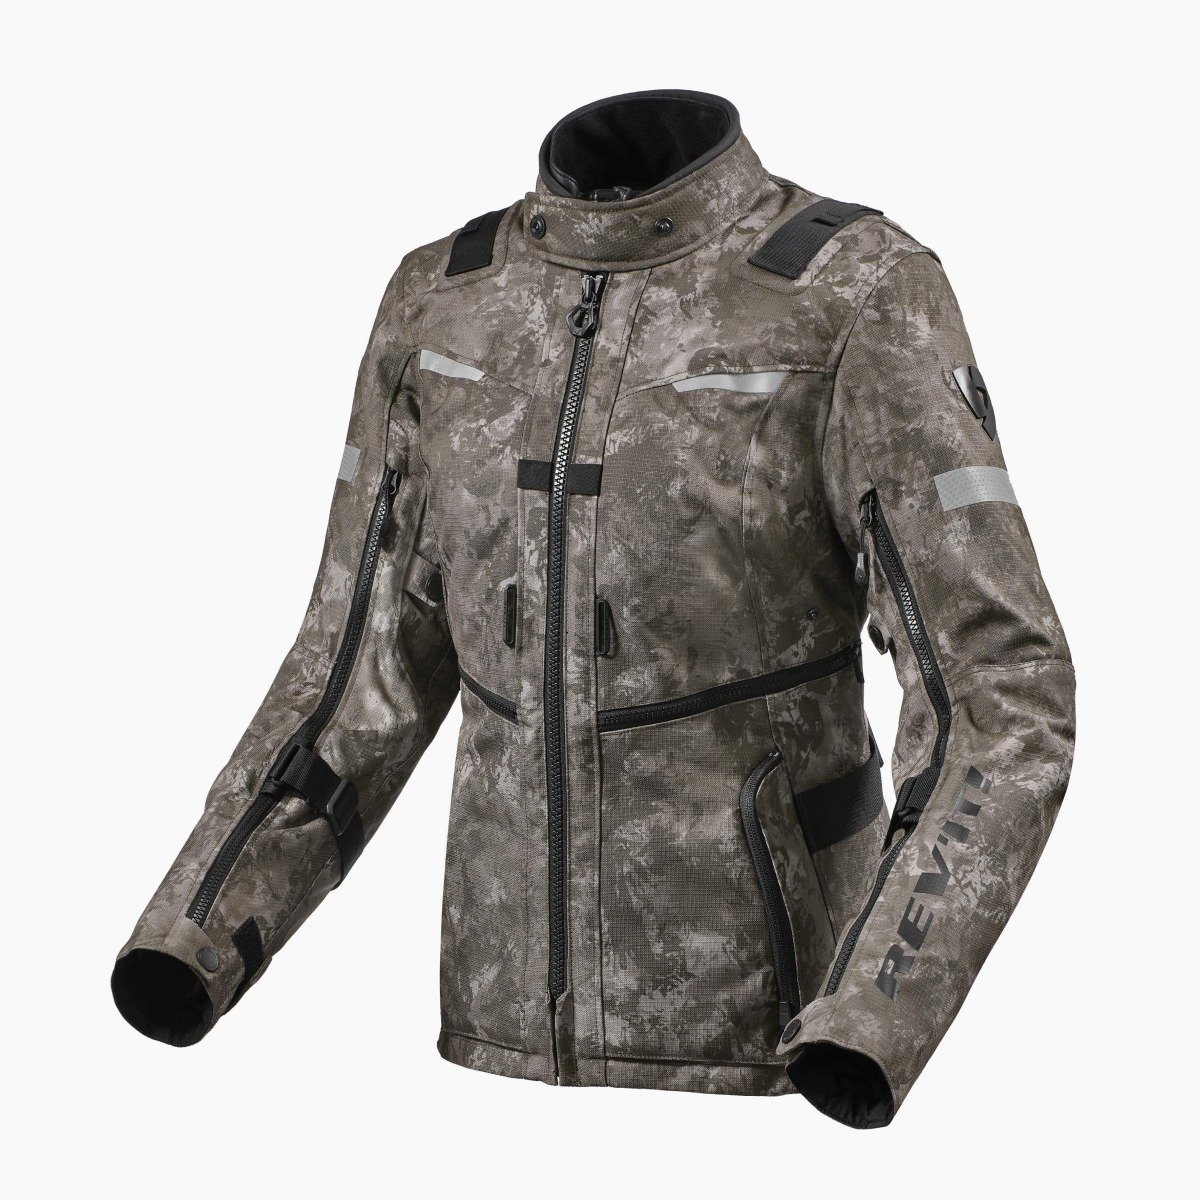 Image of REV'IT! Sand 4 H2O Jacket Lady Camo Brown Size 34 ID 8700001311595